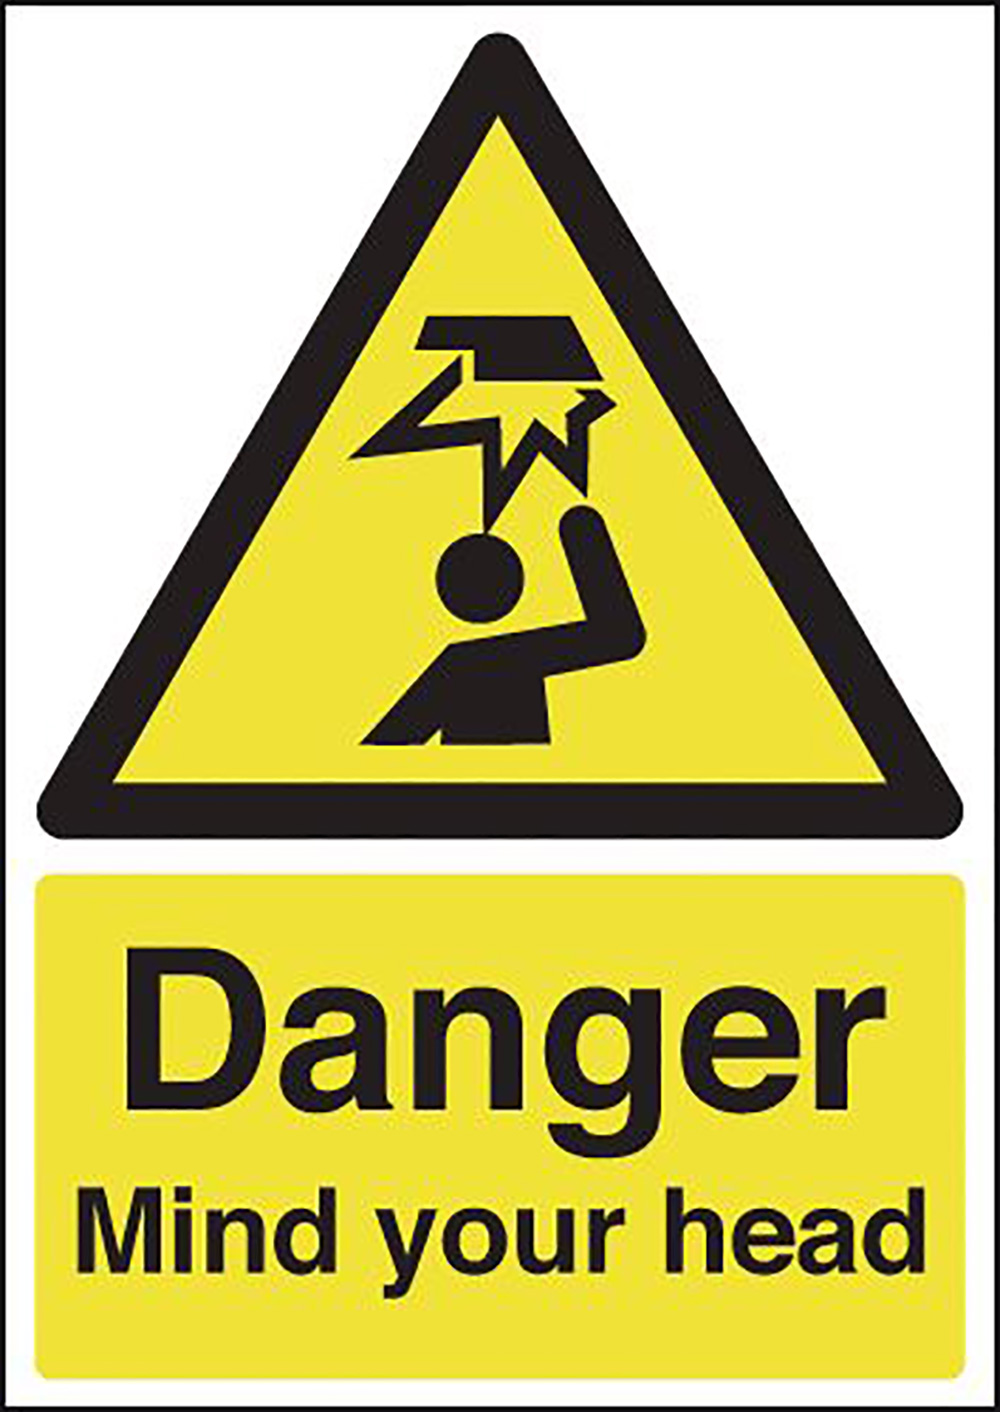 Danger Mind Your Head 420x297mm Self Adhesive Vinyl Safety Sign  